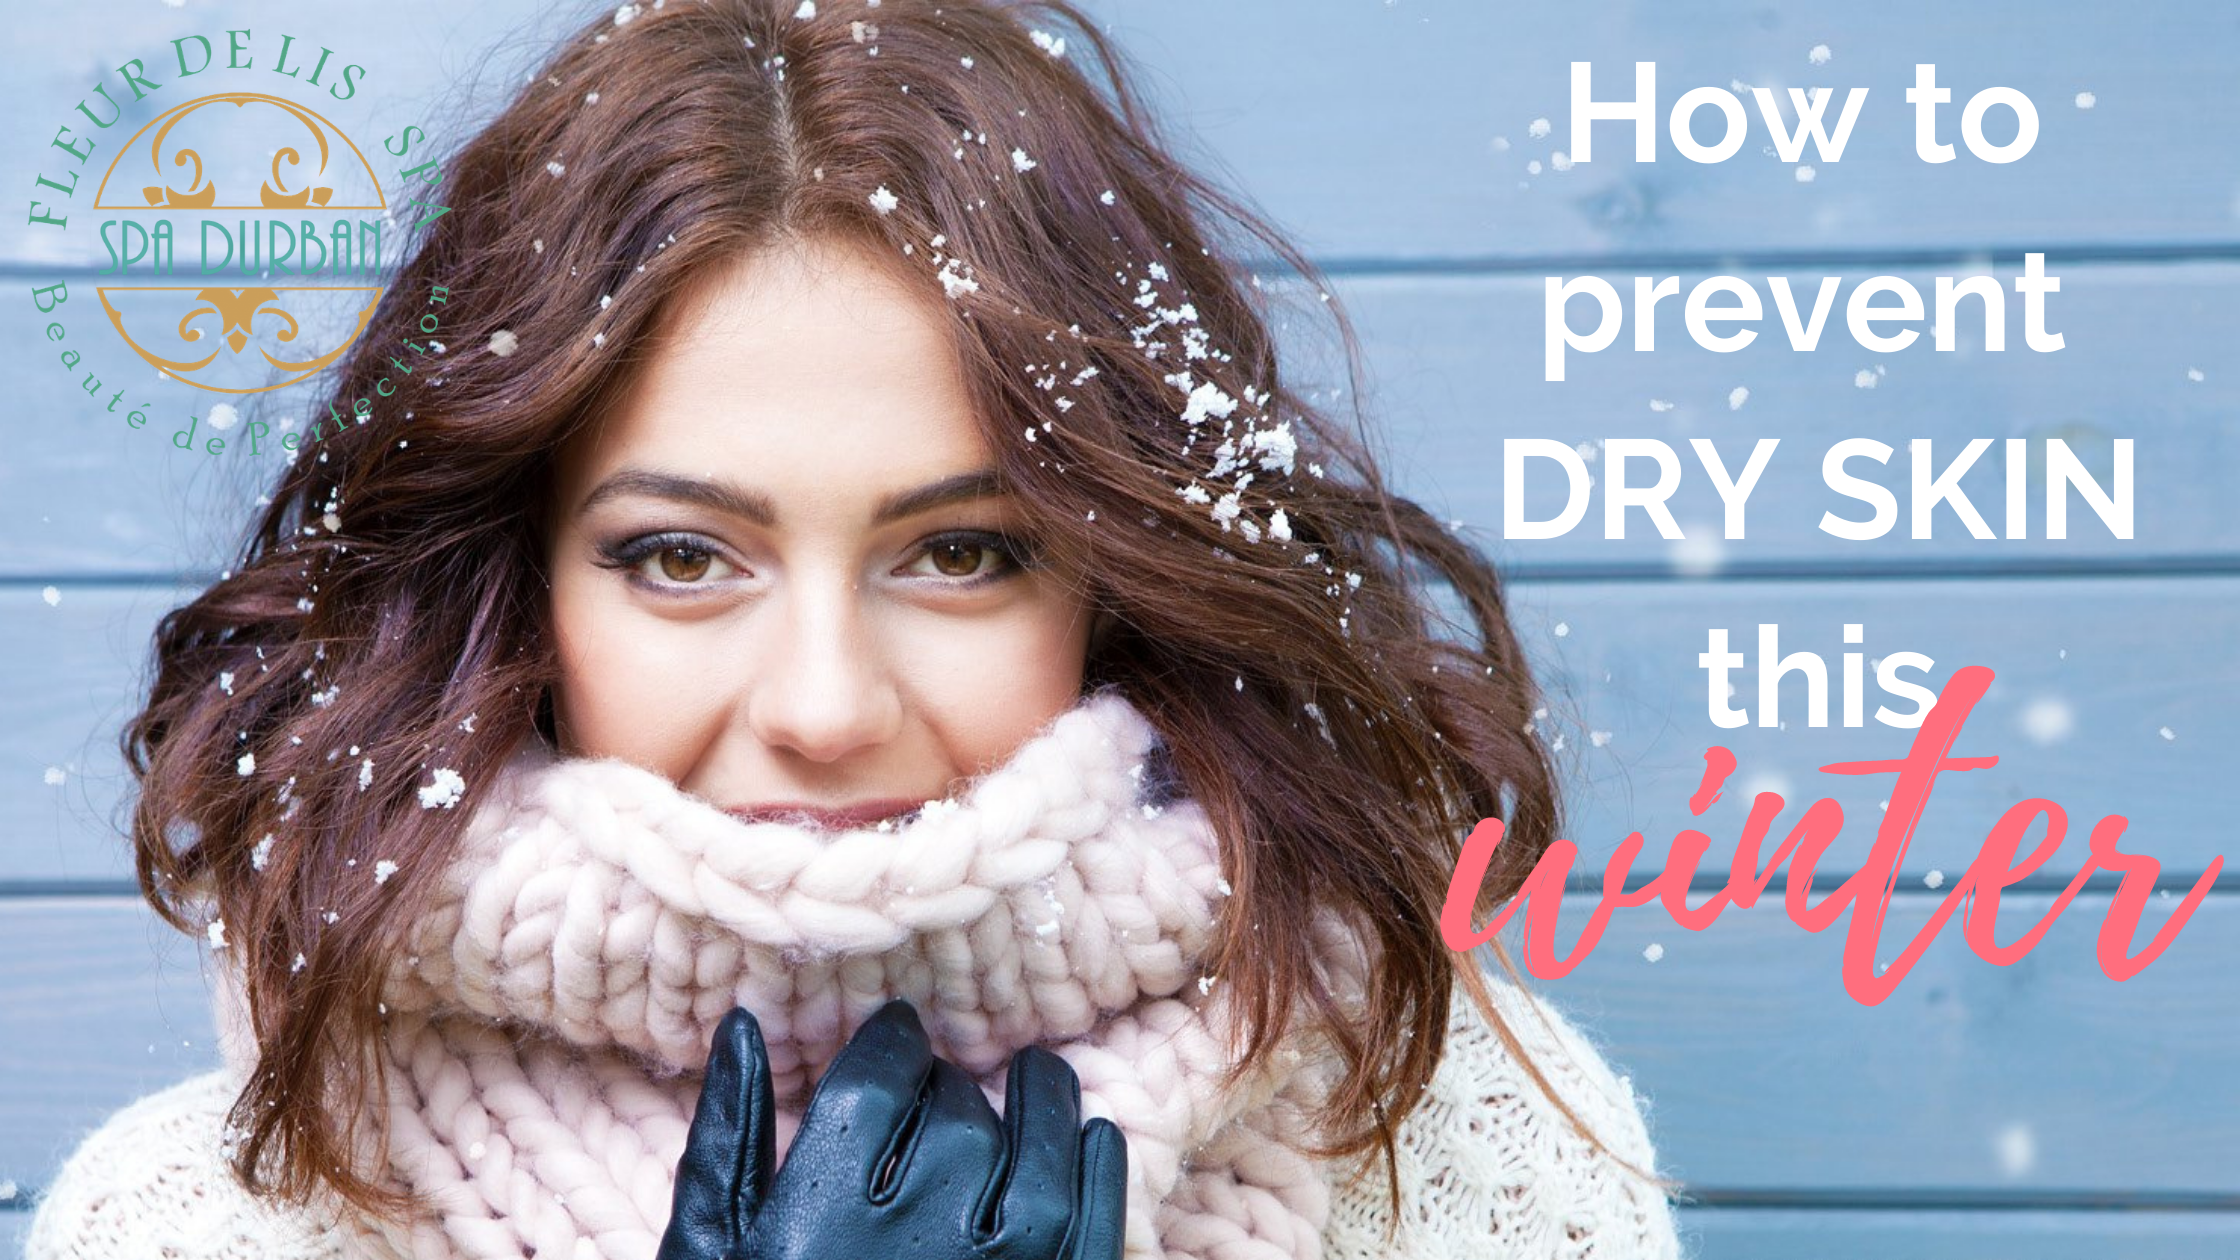 How to Prevent Dry Skin This Winter